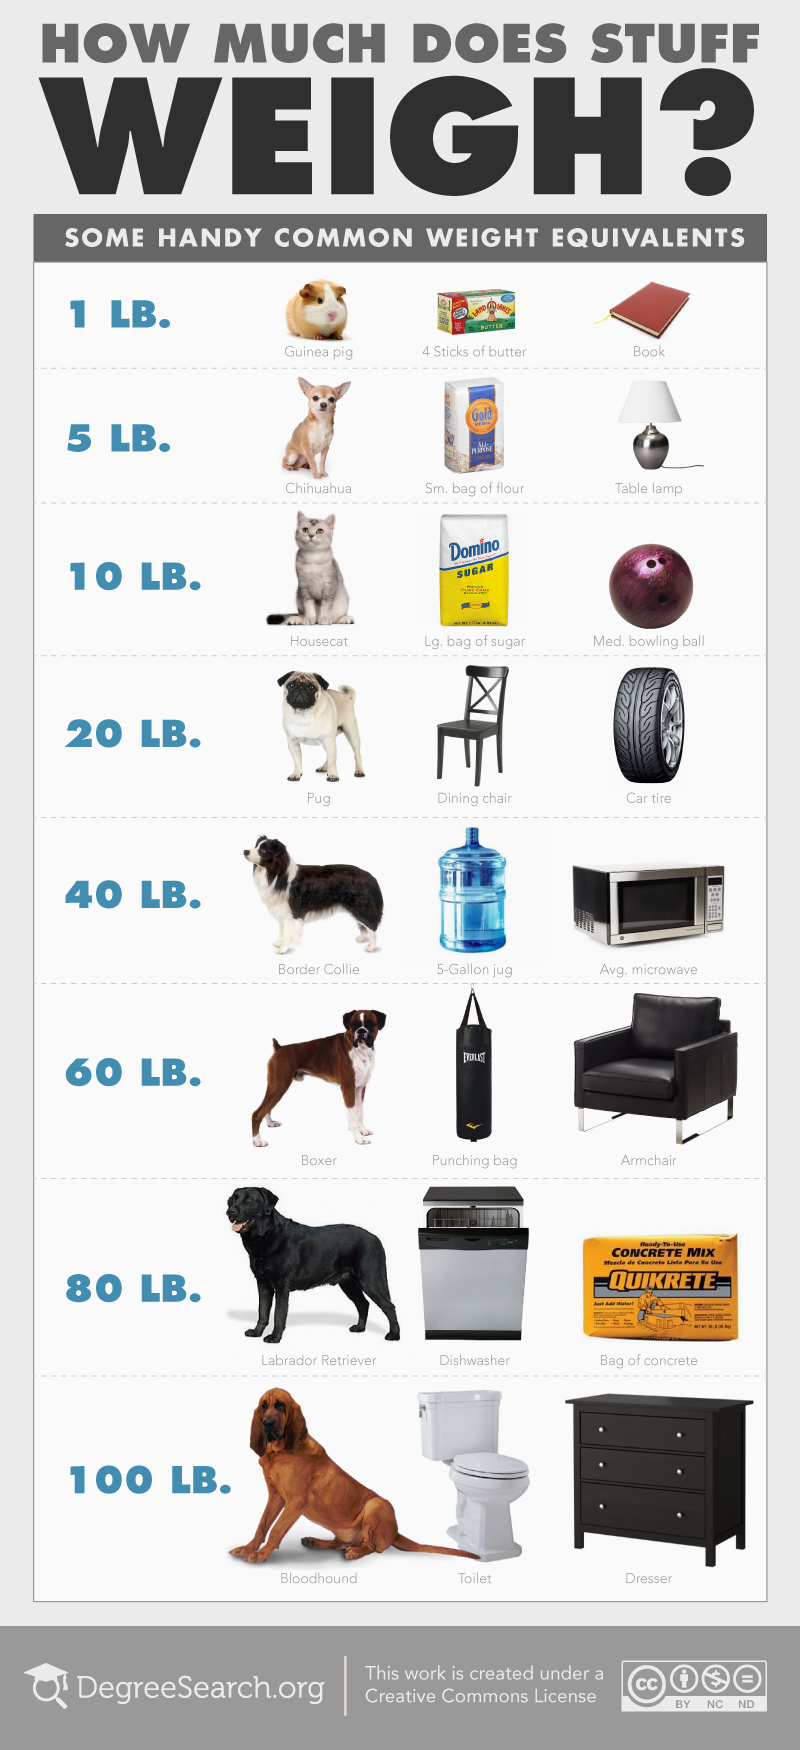 visual representation weight loss comparison to objects